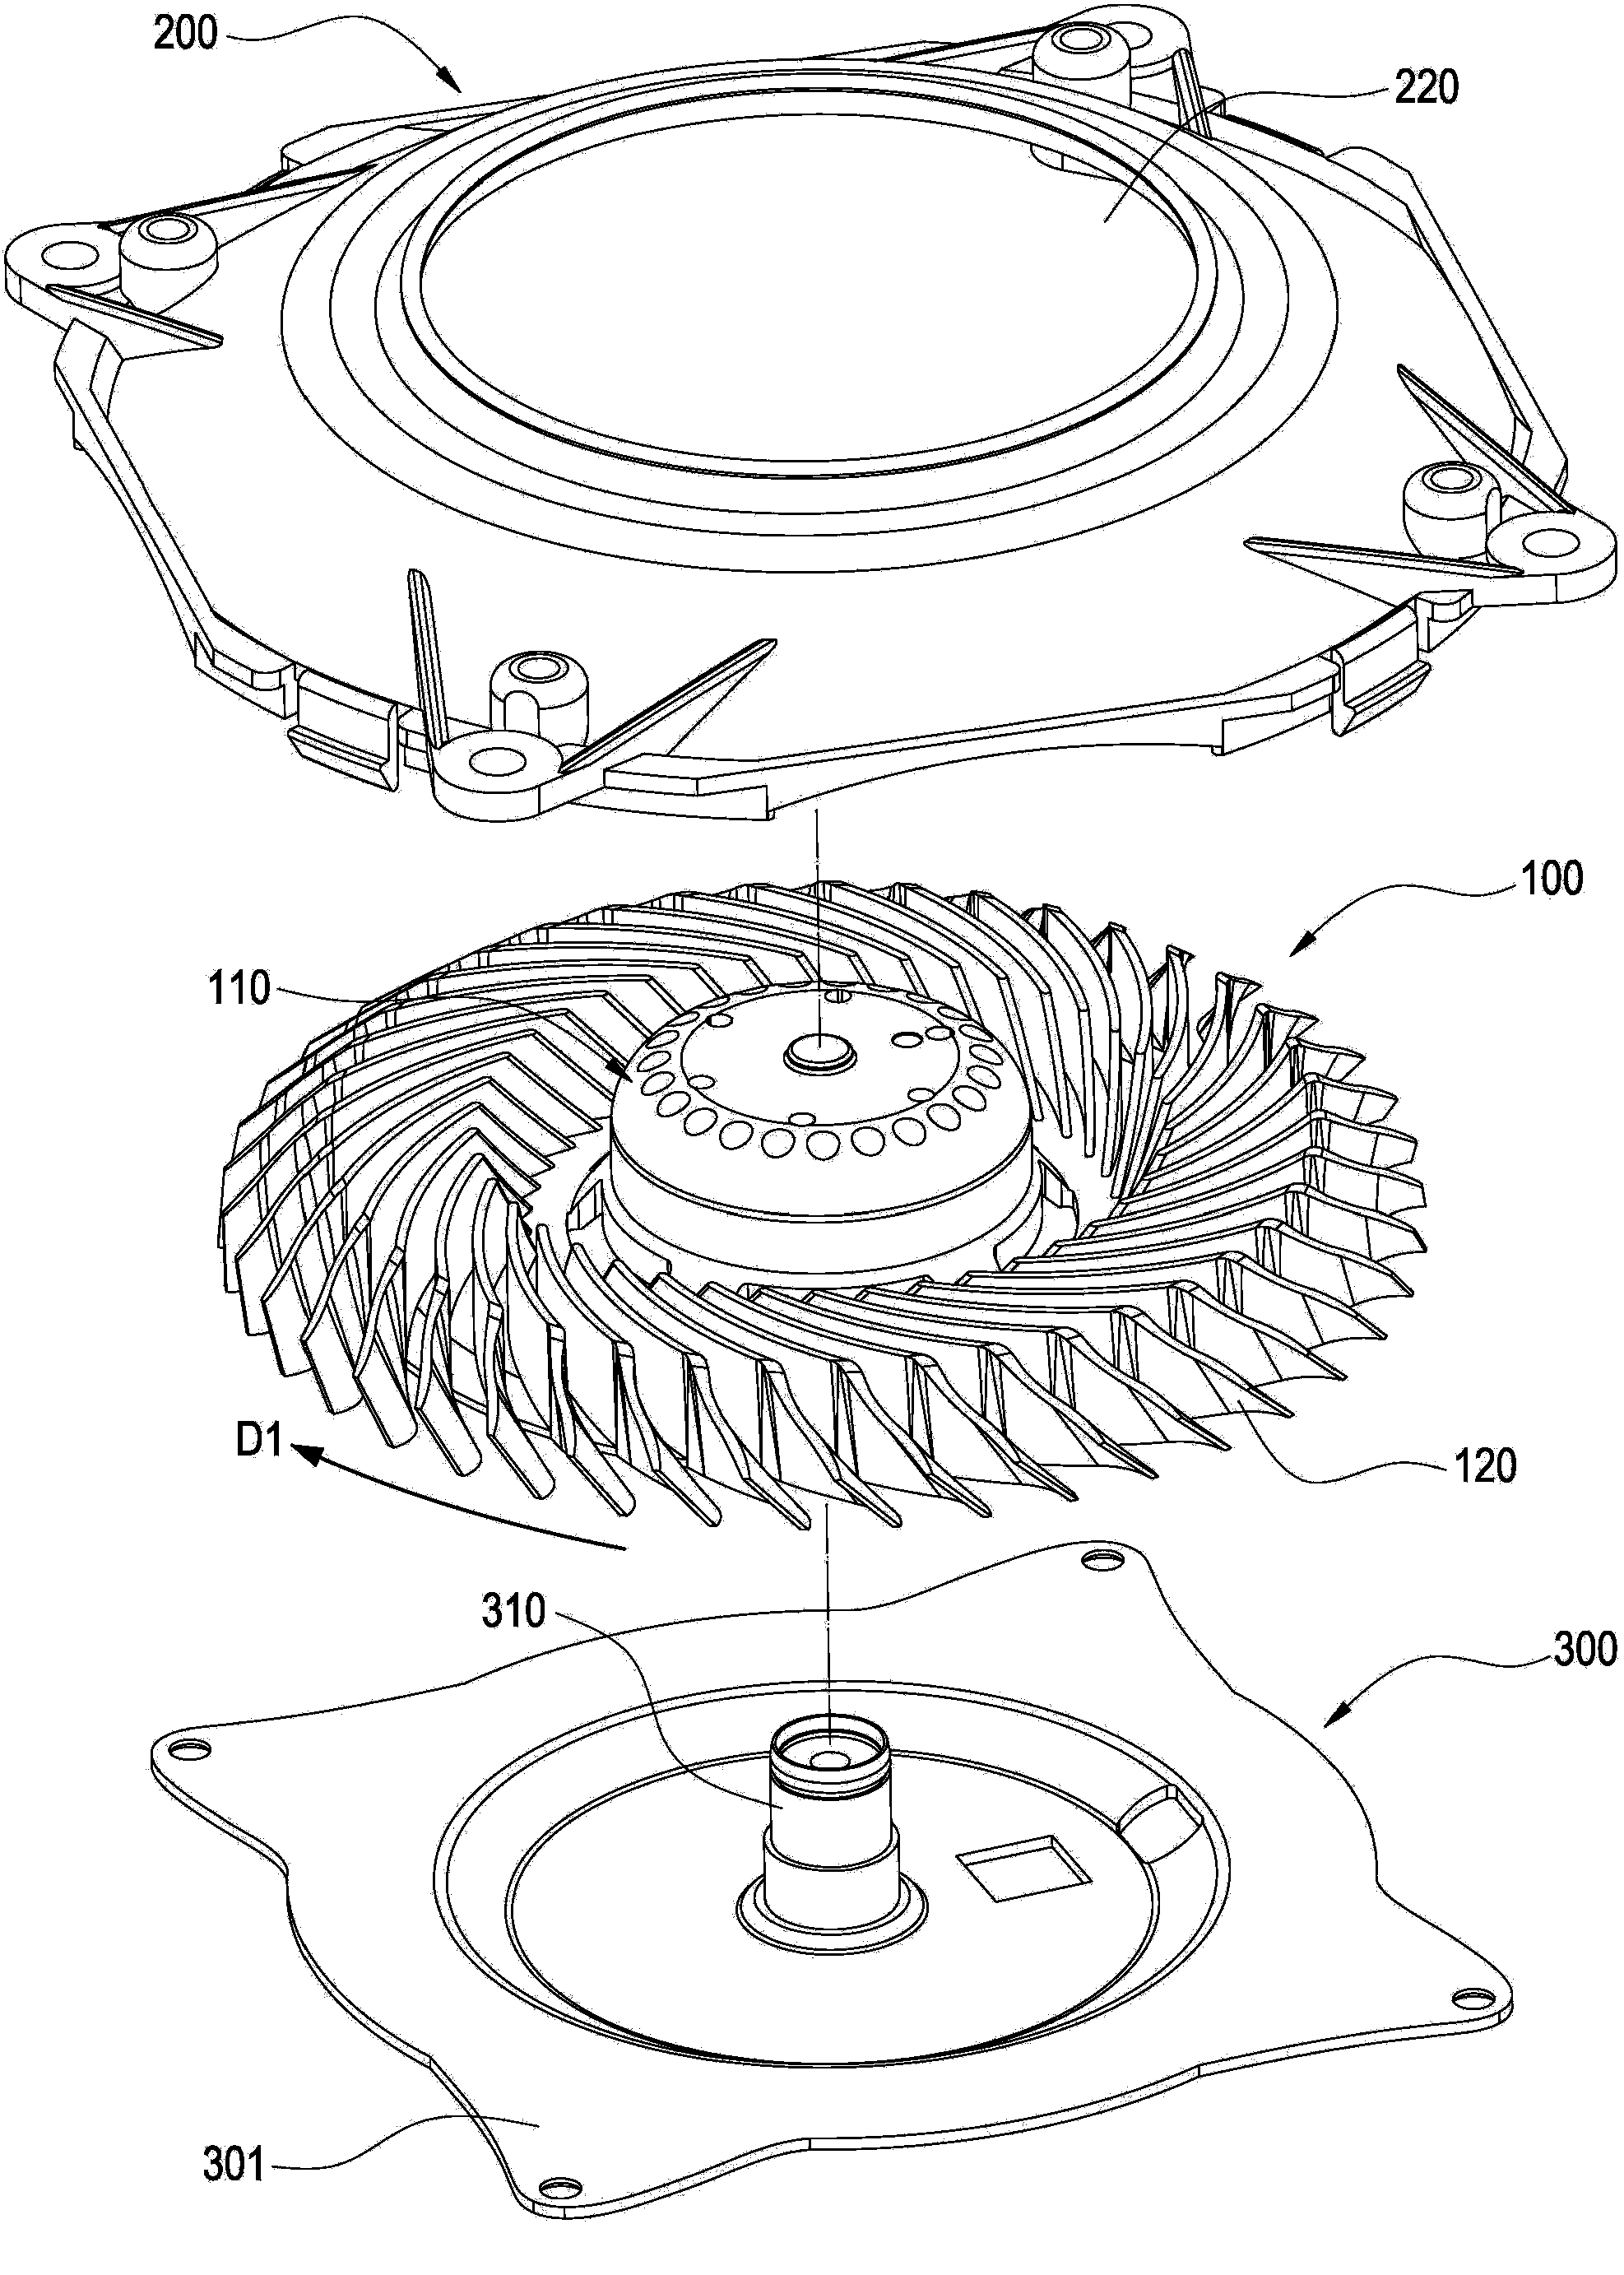 Centrifugal fan with axial flow wind direction